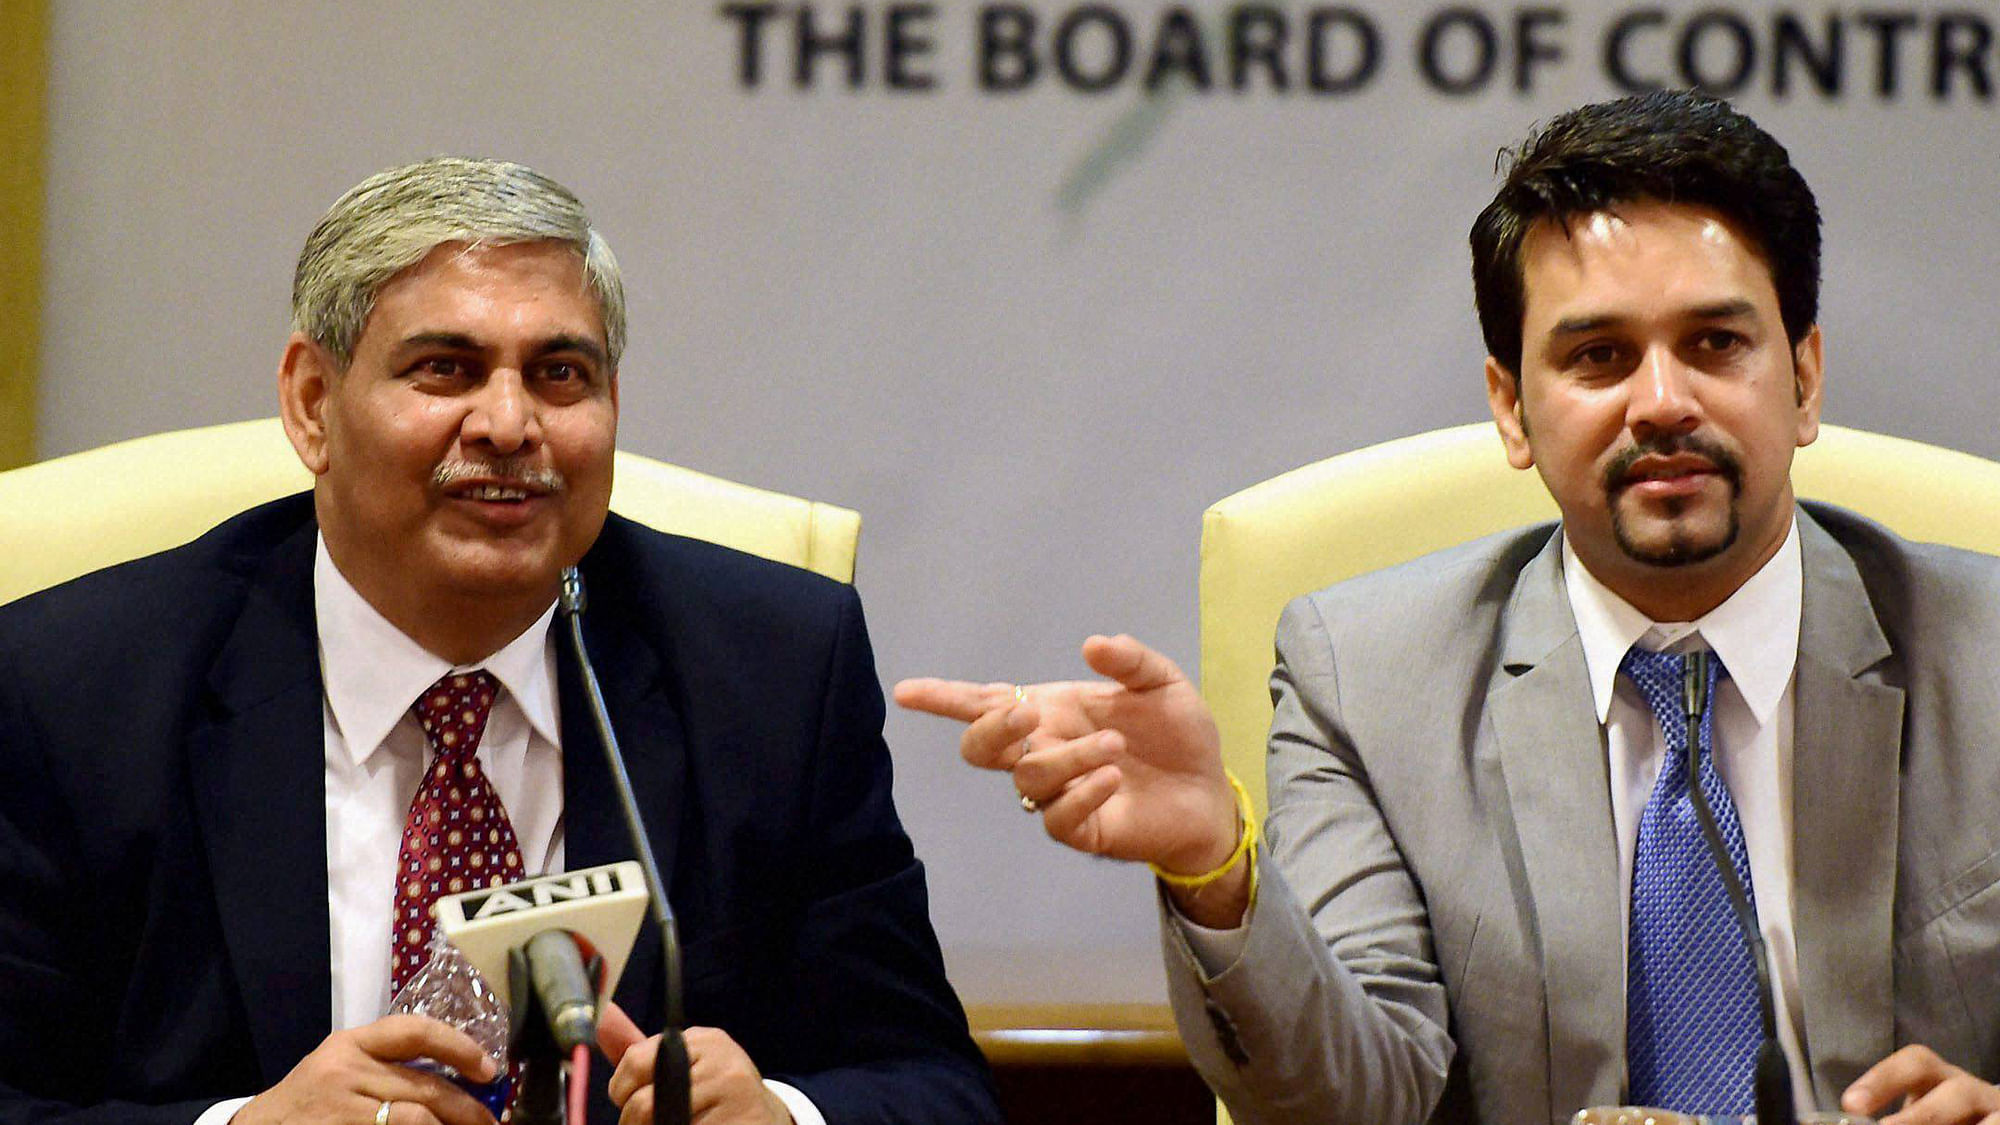 Shashank Manohar (L) was also President of the BCCI for three years from 2008 (Photo: PTI)